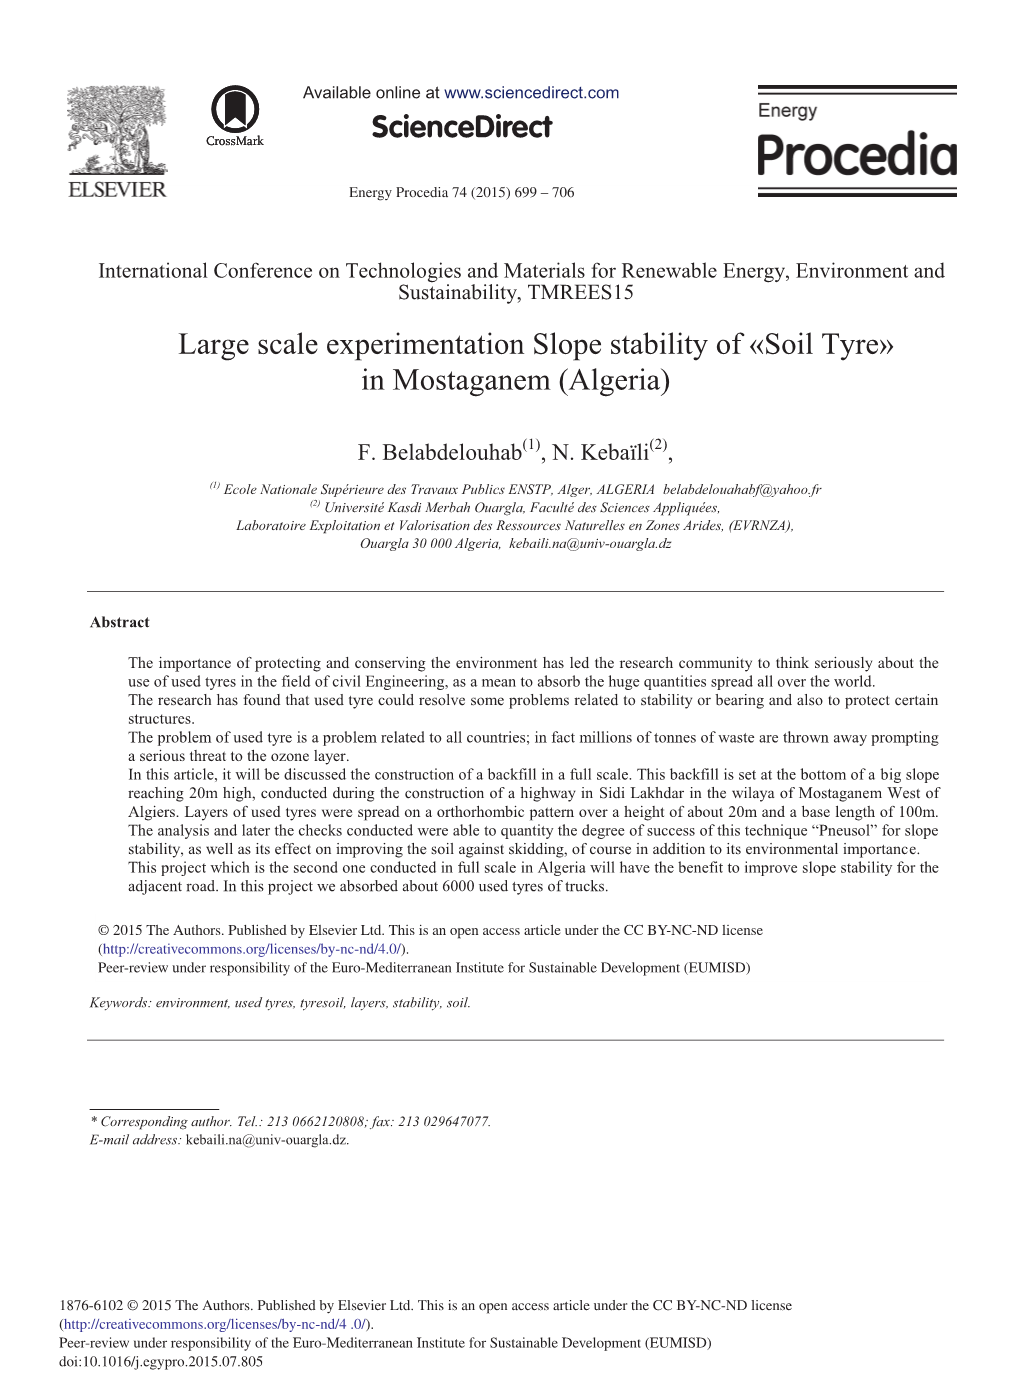 Large Scale Experimentation Slope Stability of «Soil Tyre» in Mostaganem (Algeria)